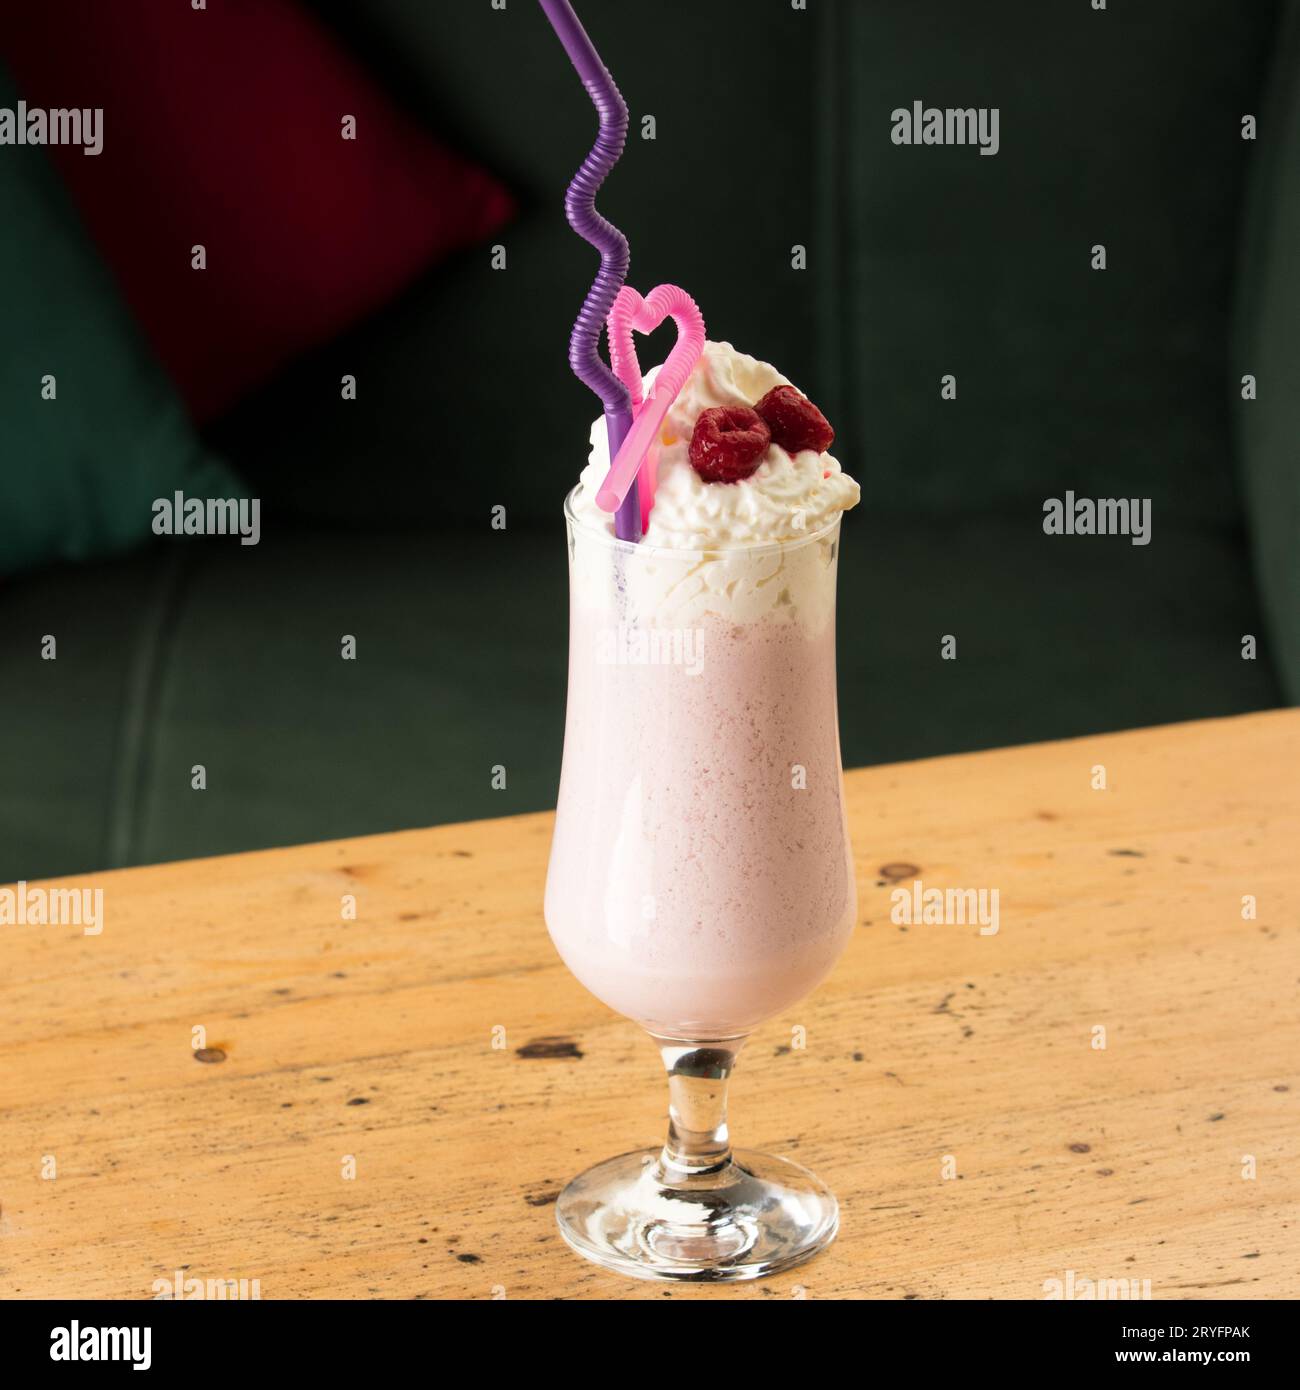 Closeup shot of a healthy strawberry smoothie in a mug with drinking tubules on a wooden table Stock Photo